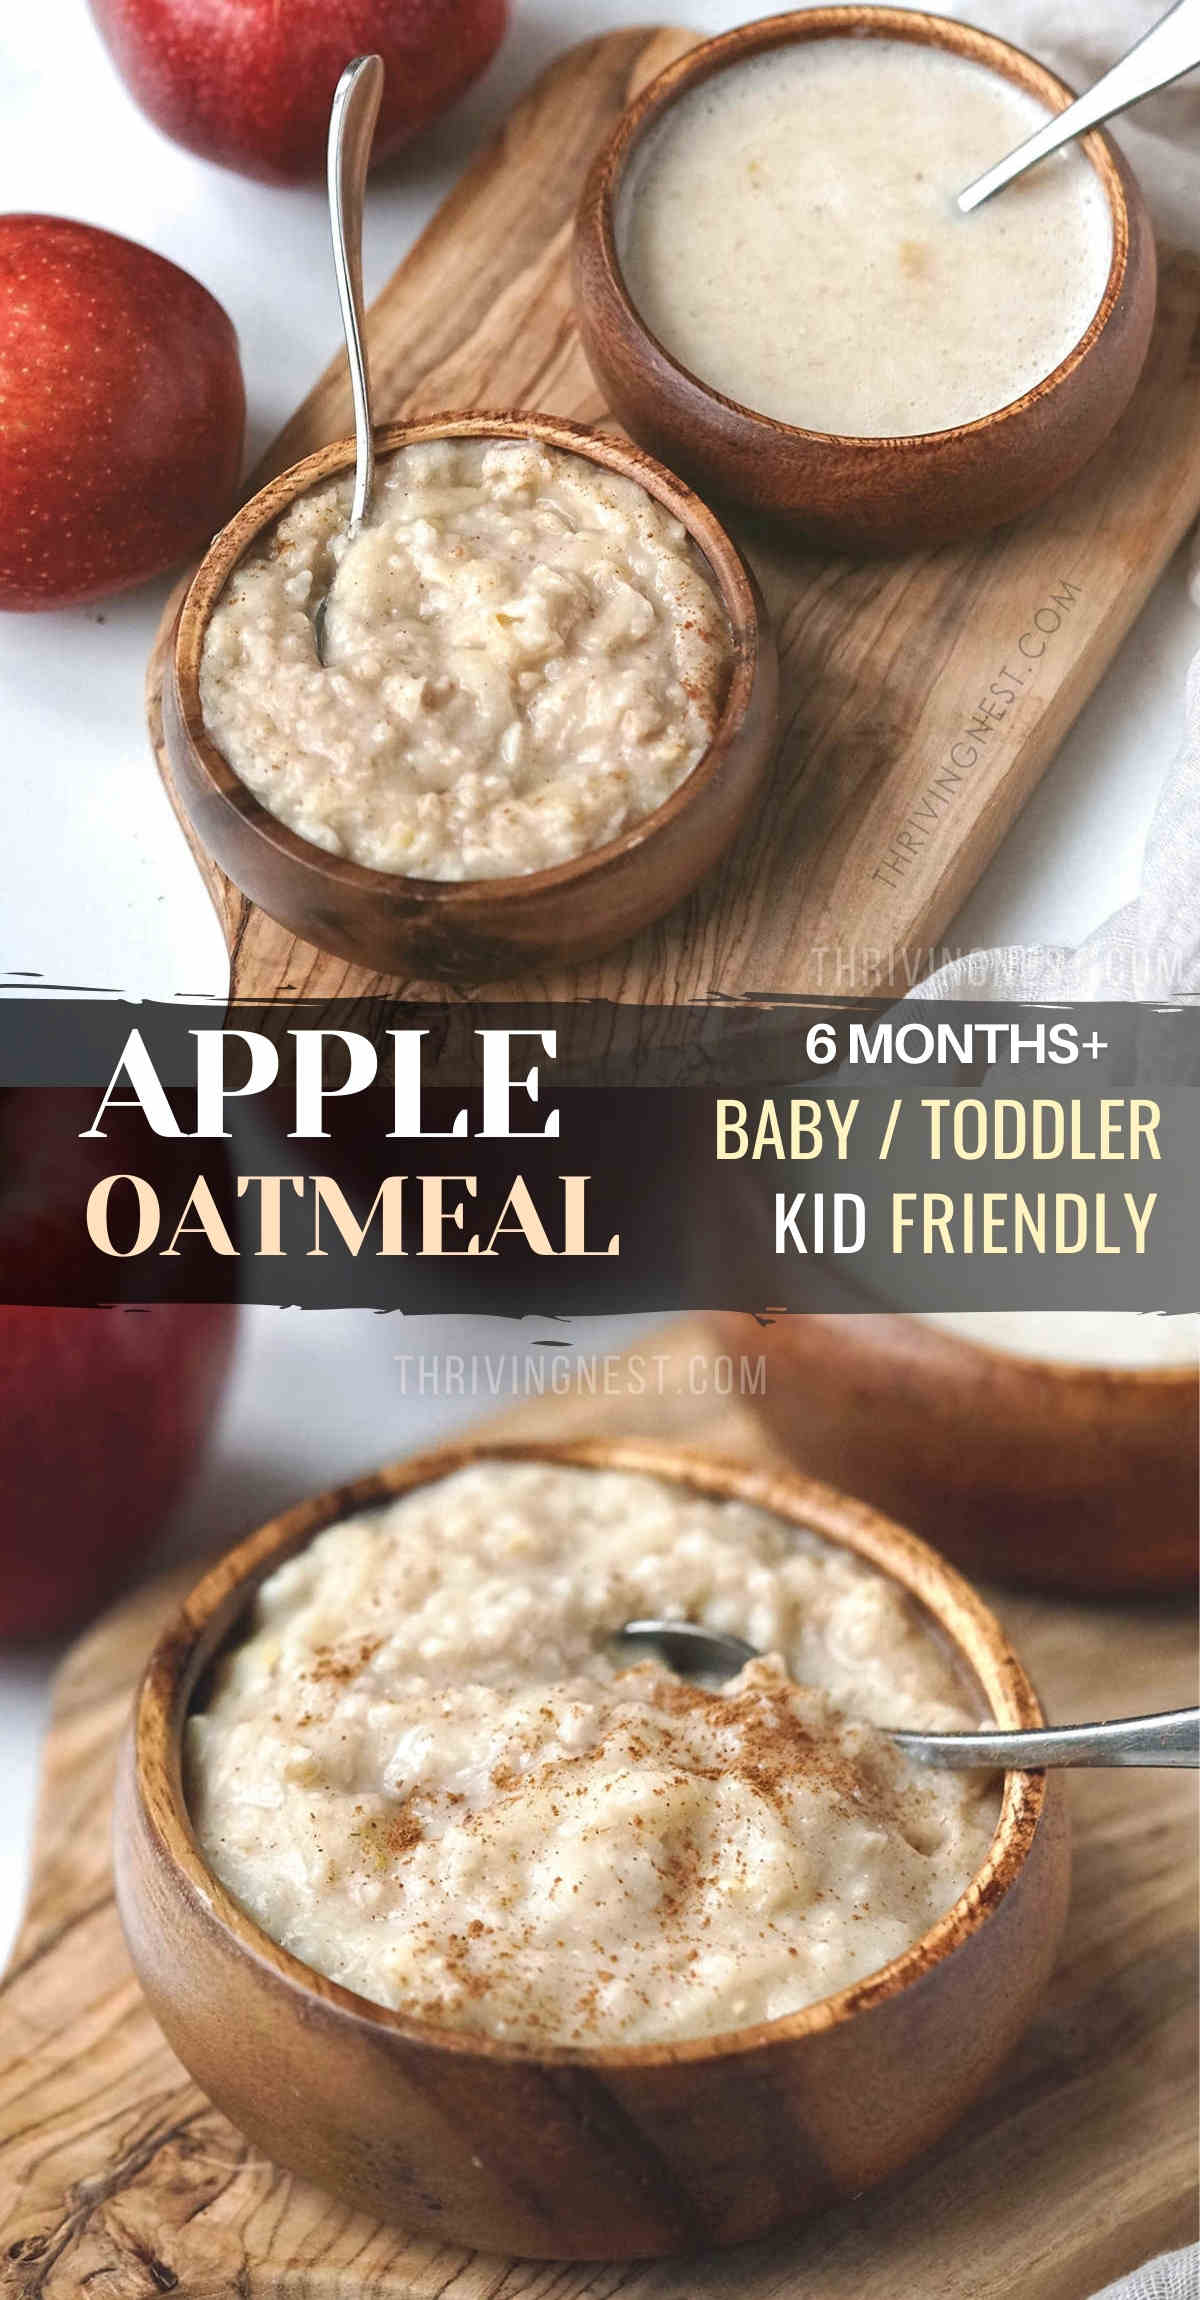 This apple oatmeal for baby is simple and easy to make. Flavored with apple and touch of cinnamon this baby oatmeal can be ready in just under 10 minutes. Adjust it’s texture according to your baby’s age by adding a little breast milk, or other milk to make it smoother. This baby oatmeal porridge makes a delicious breakfast that can be served for babies 6 months and up, toddlers and older kids. #oatmealforbaby #oatmealforbabies #appleoatmeal #oatmealbabyfood #babyoatmeal #babyporridge